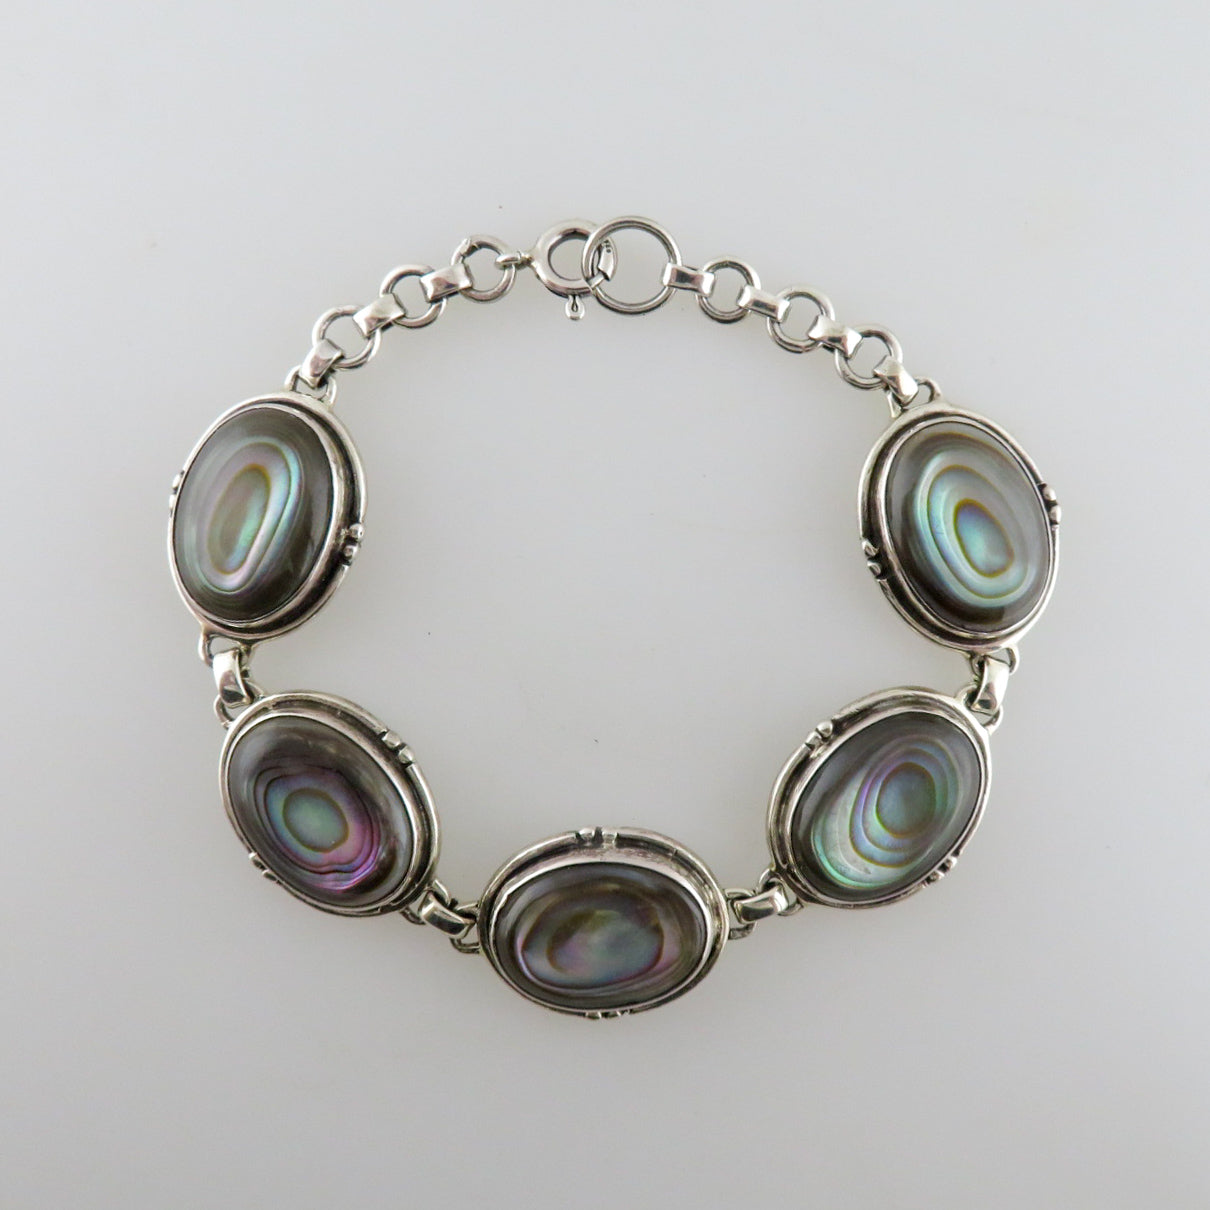 Paua Shell (Rainbow Abalone) Bracelet with Sterling Silver